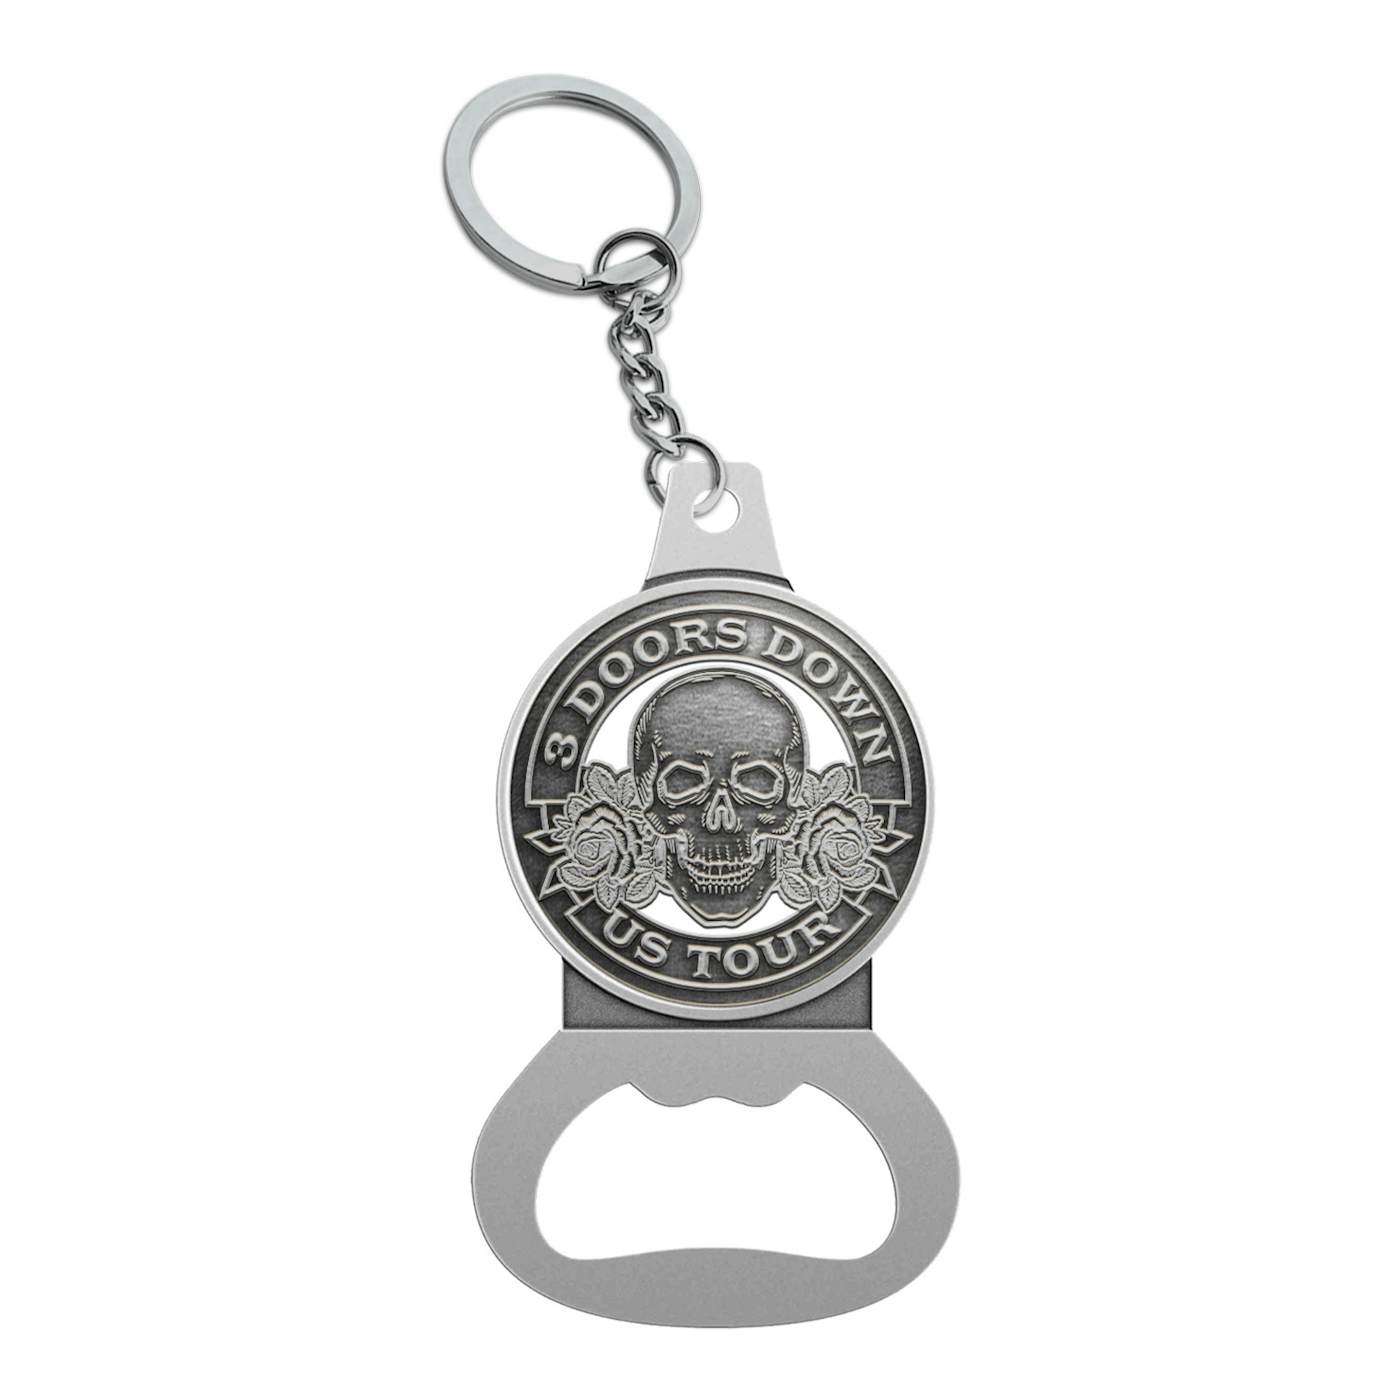 3 Doors Down Skull and Roses Keychain